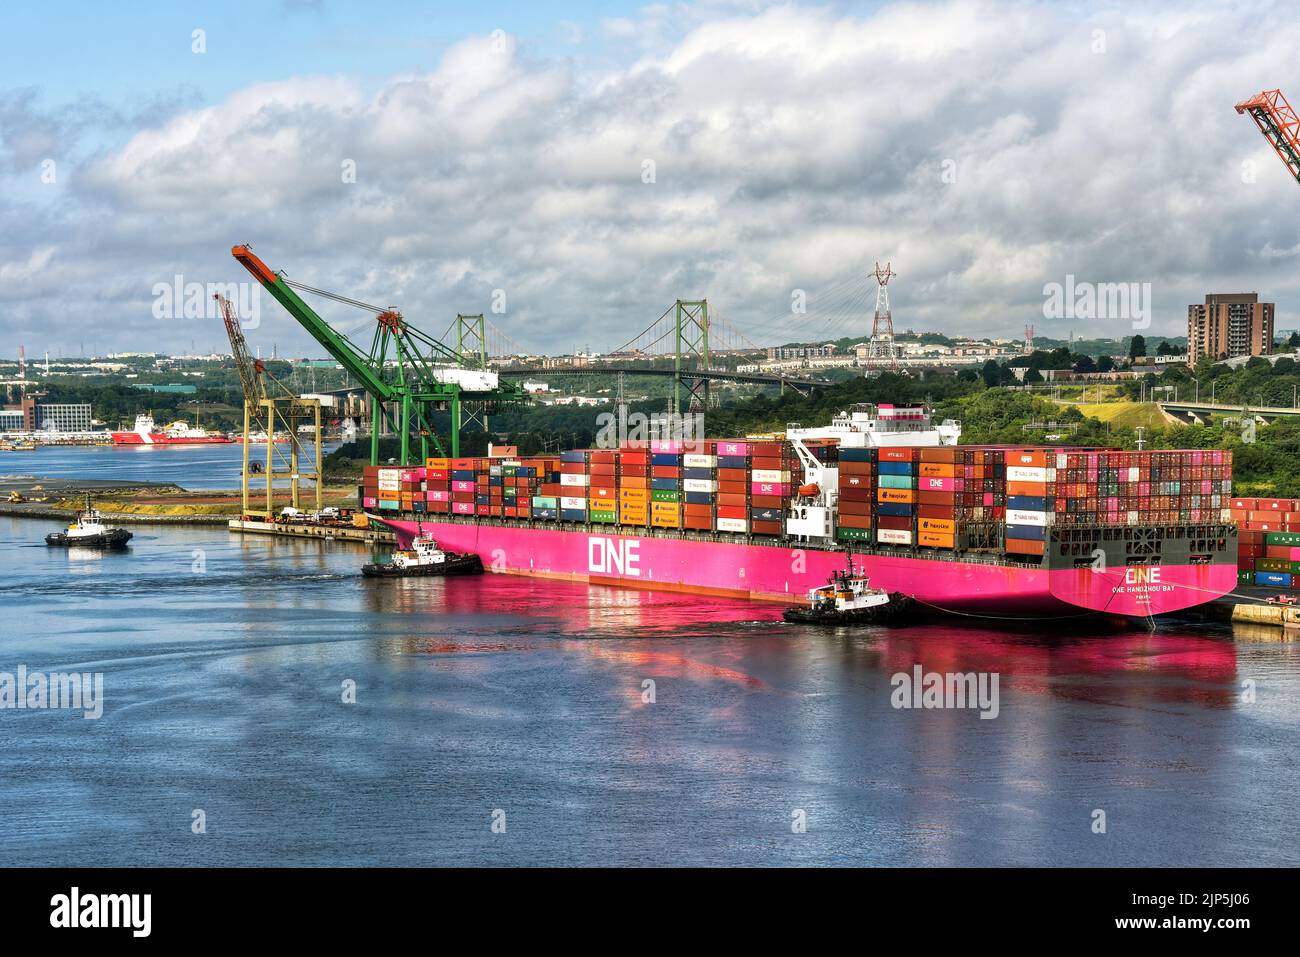 Halifax, Canada - July 30, 2022: Tugboats assist the One Hangzhou Bay container ship as it leaves the Fairview Cove Container Terminal in the Bedford Stock Photo